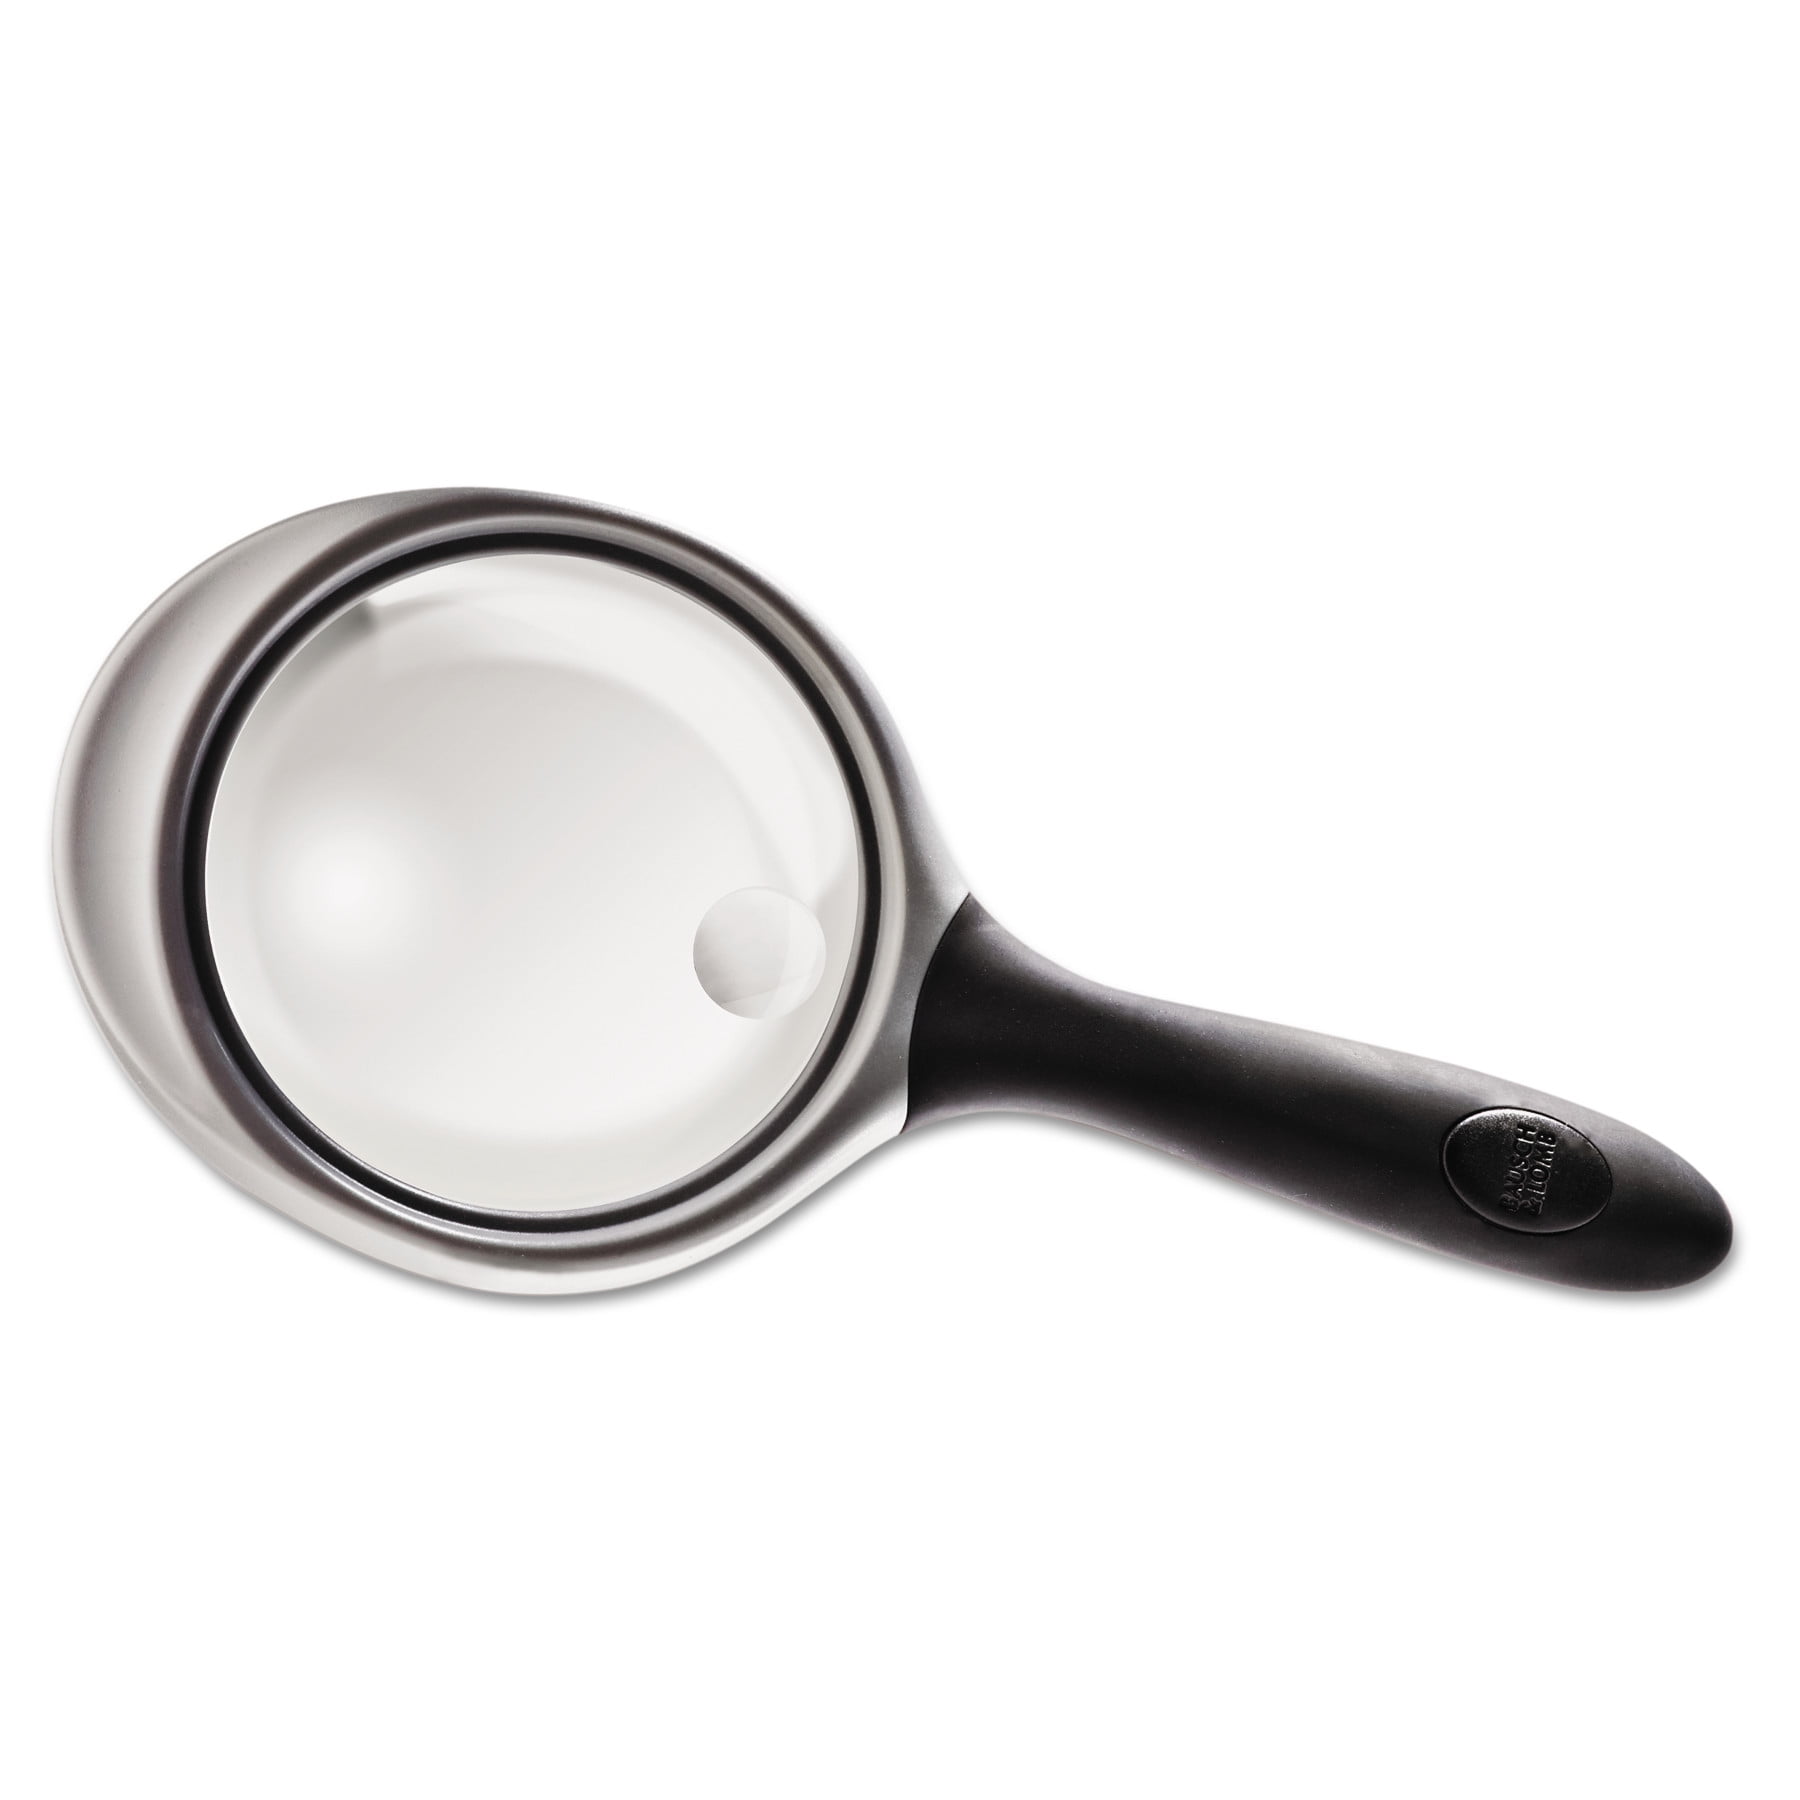 Bausch & Lomb 2X - 4X Round Handheld Magnifier with Acrylic Lens, 3 1/4 ...